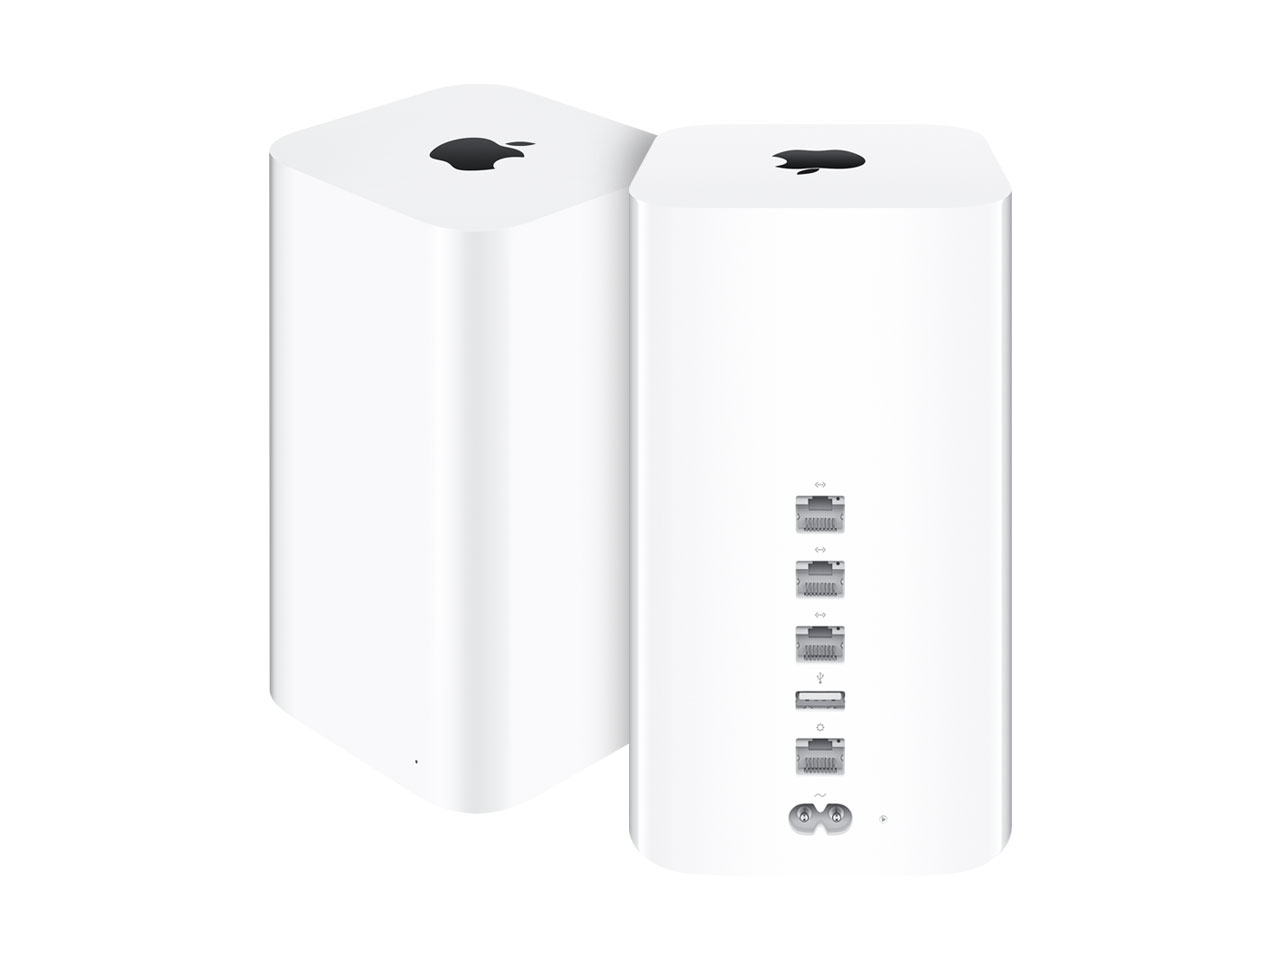 apple airport extreme base station details